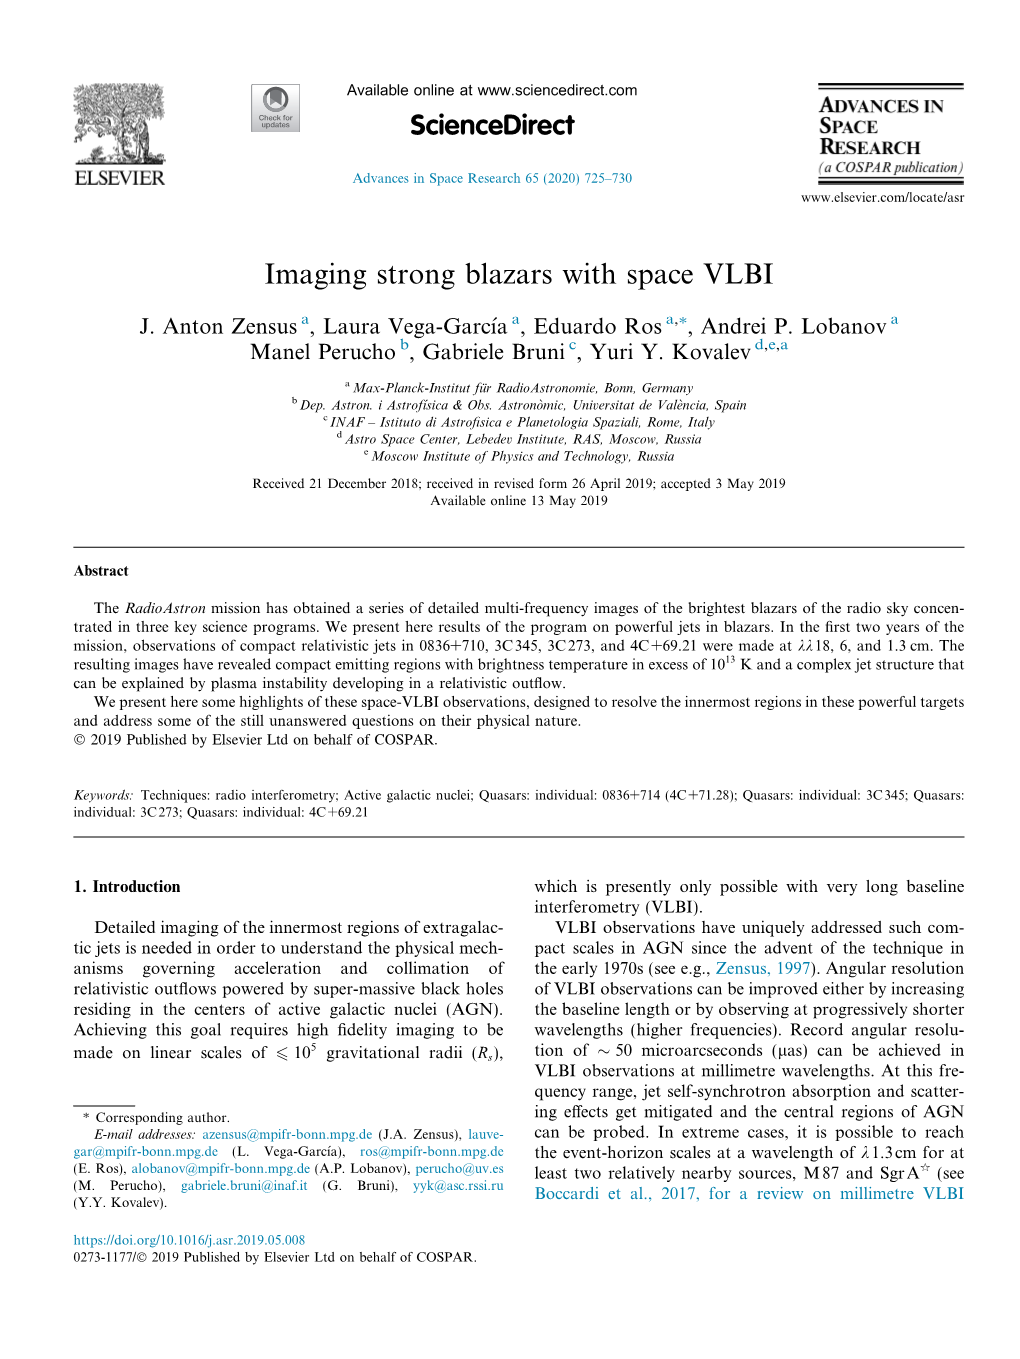 Imaging Strong Blazars with Space VLBI